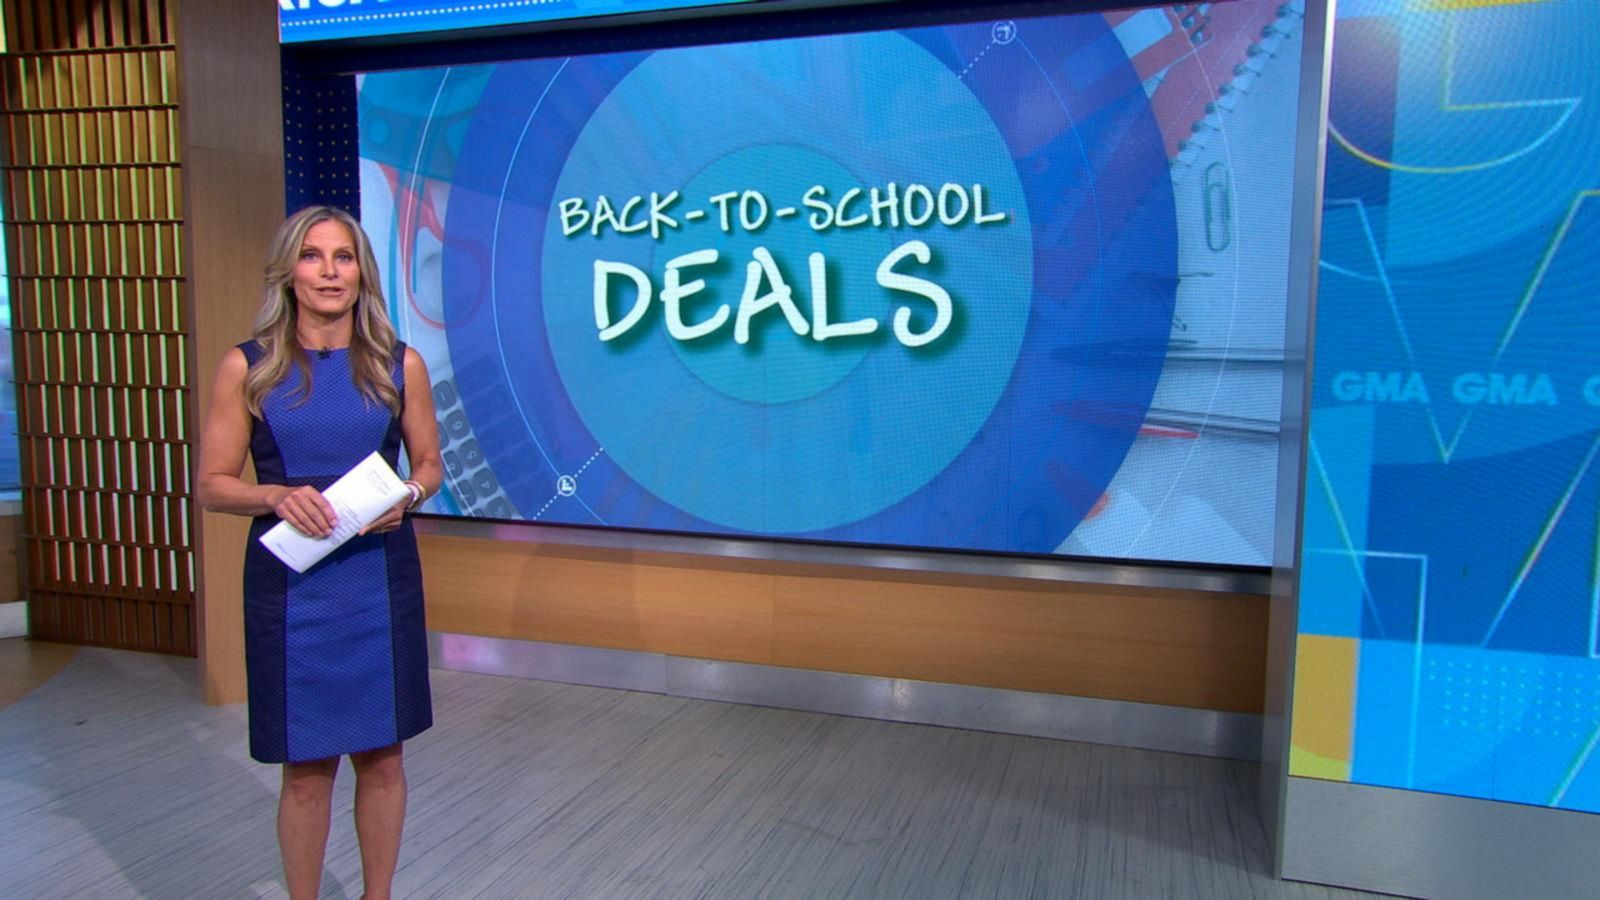 VIDEO: Experts warn of expensive back-to-school shopping season